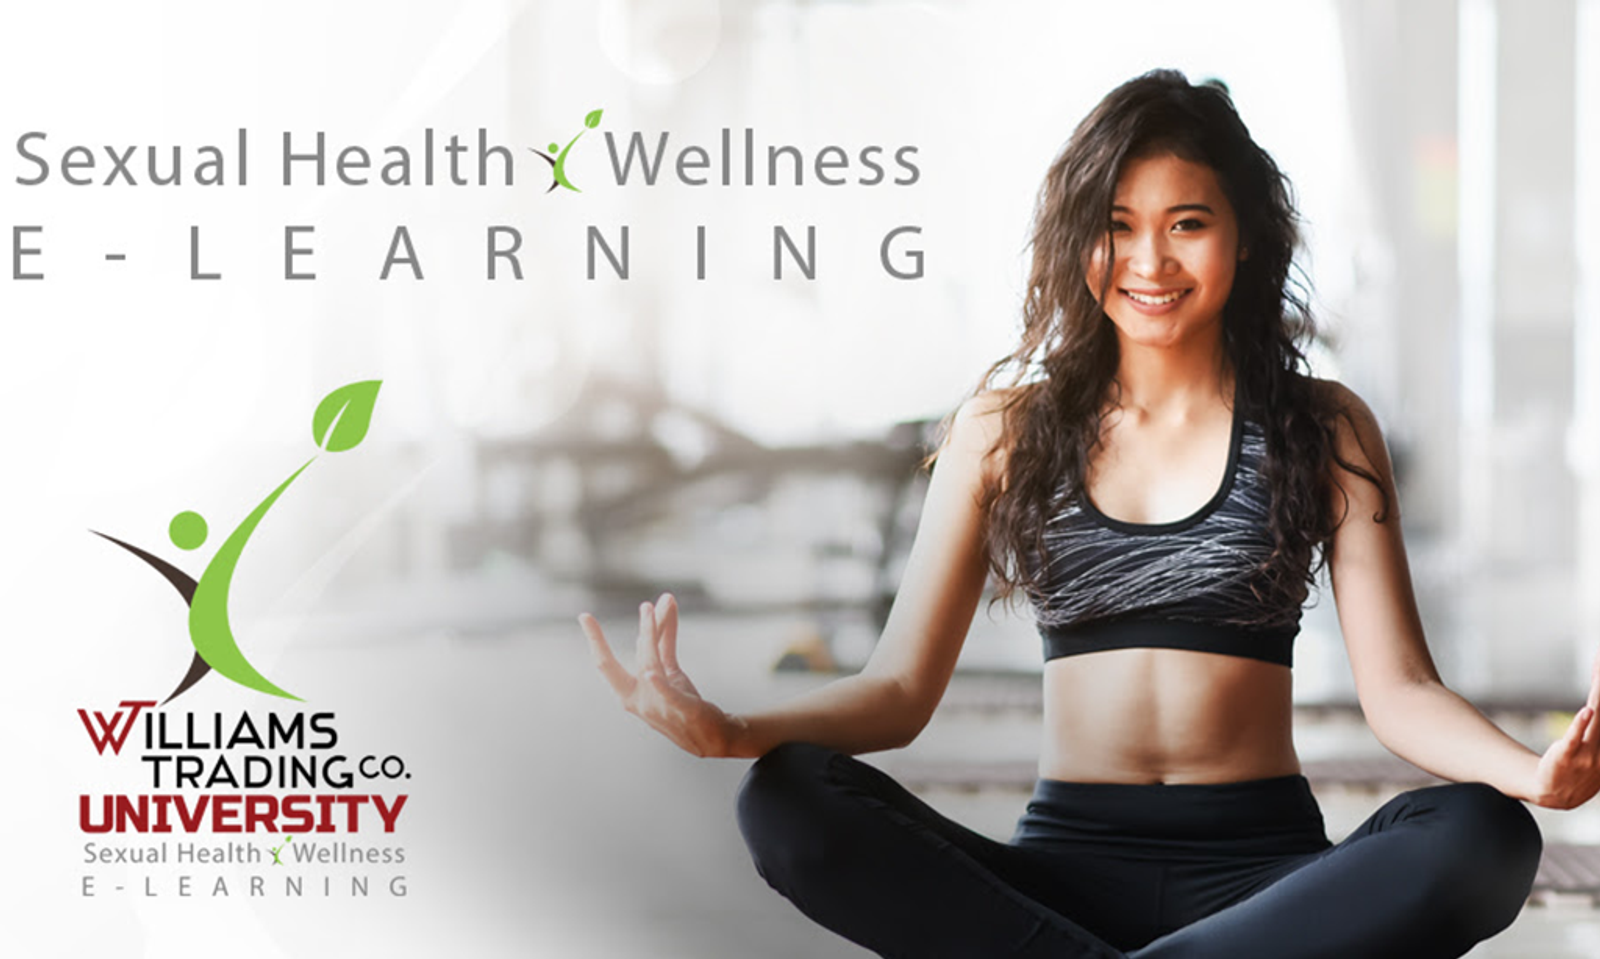 Williams Trading Univ. Debuts Sexual Health & Wellness Channel